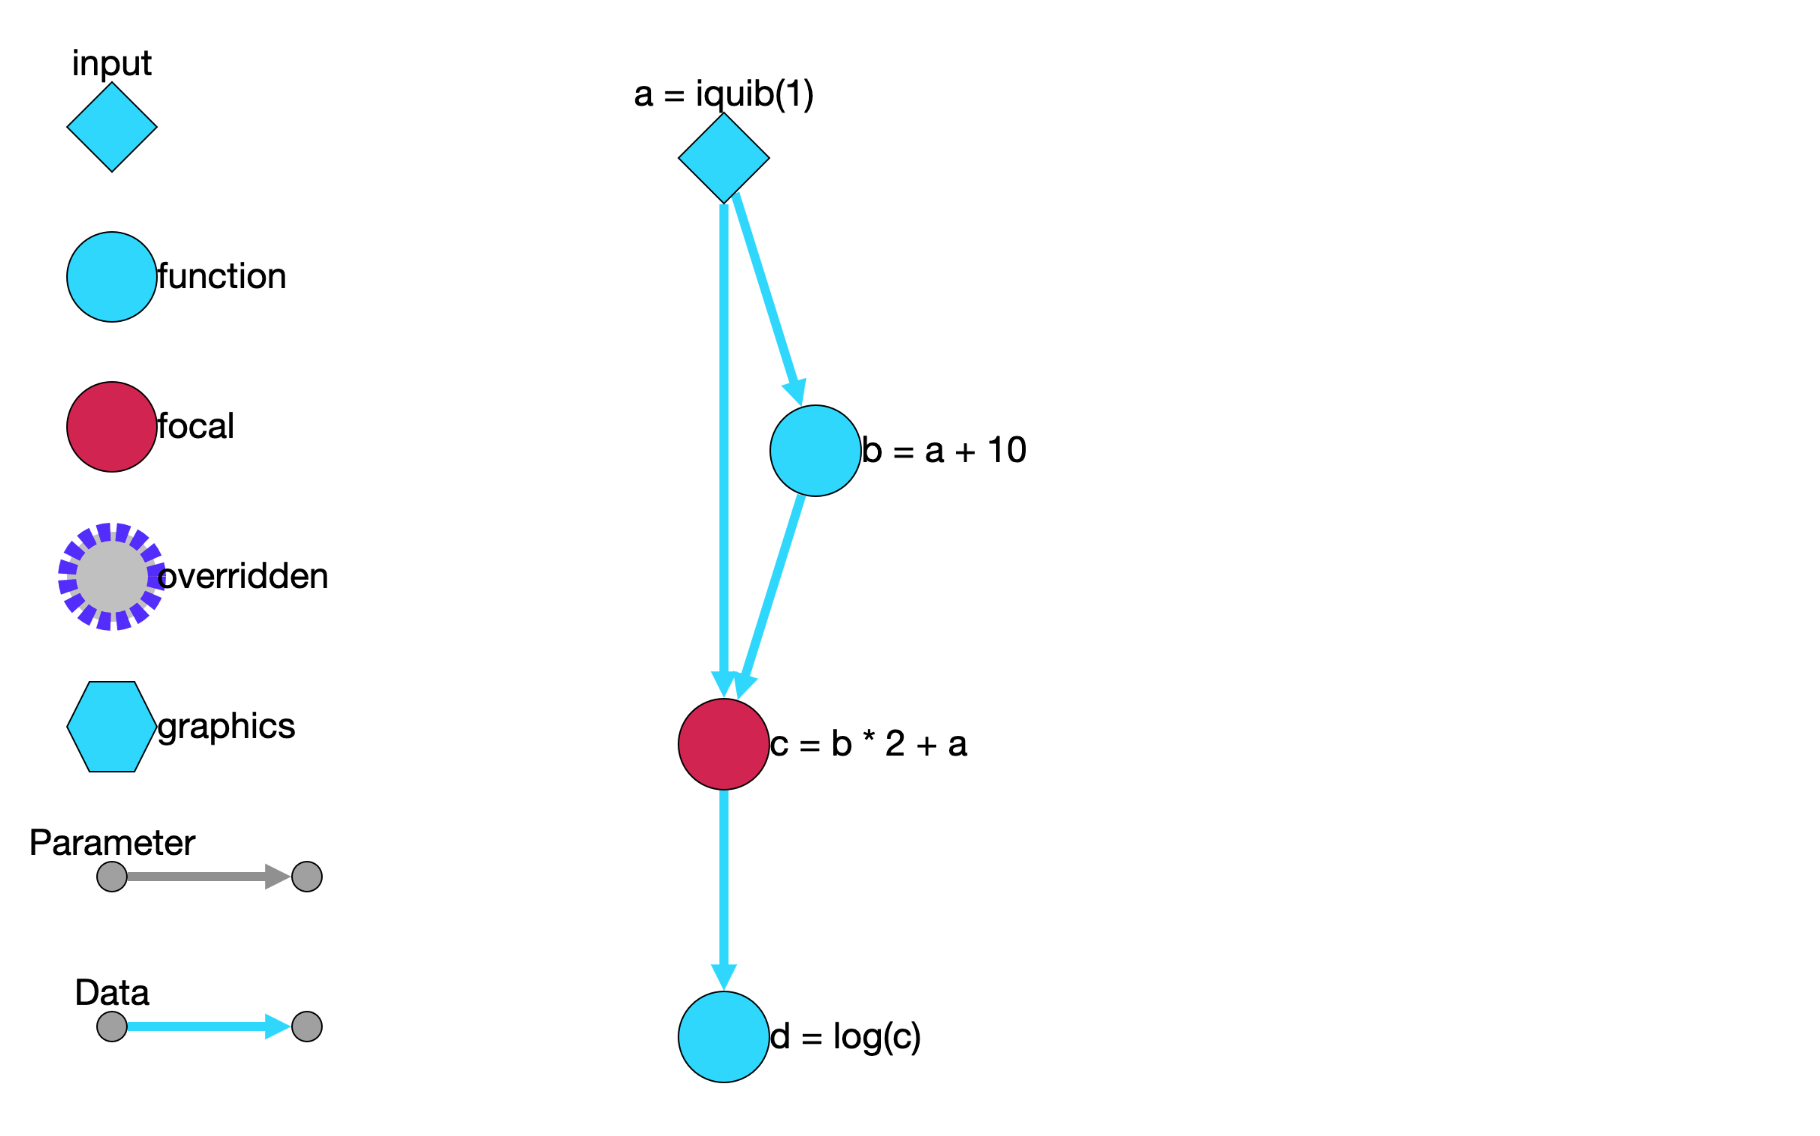 _images/dependency_graph_1.png